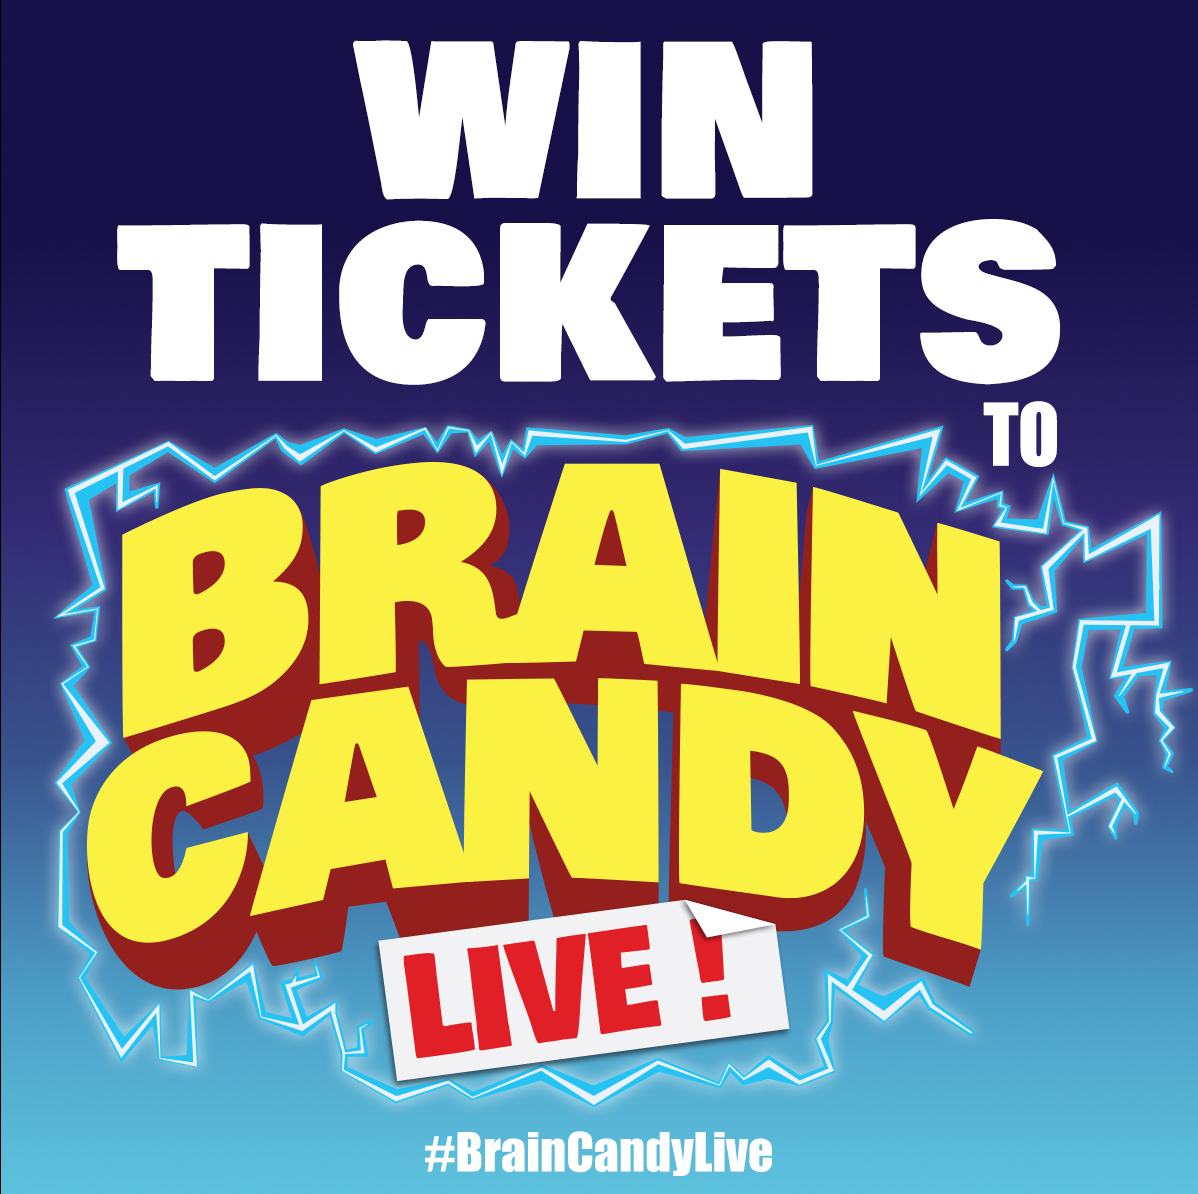 Win Tickets To See Brain Candy Live! - Coming to Detroit’s Fox Theatre March 5, 2017 | Wading in Big Shoes